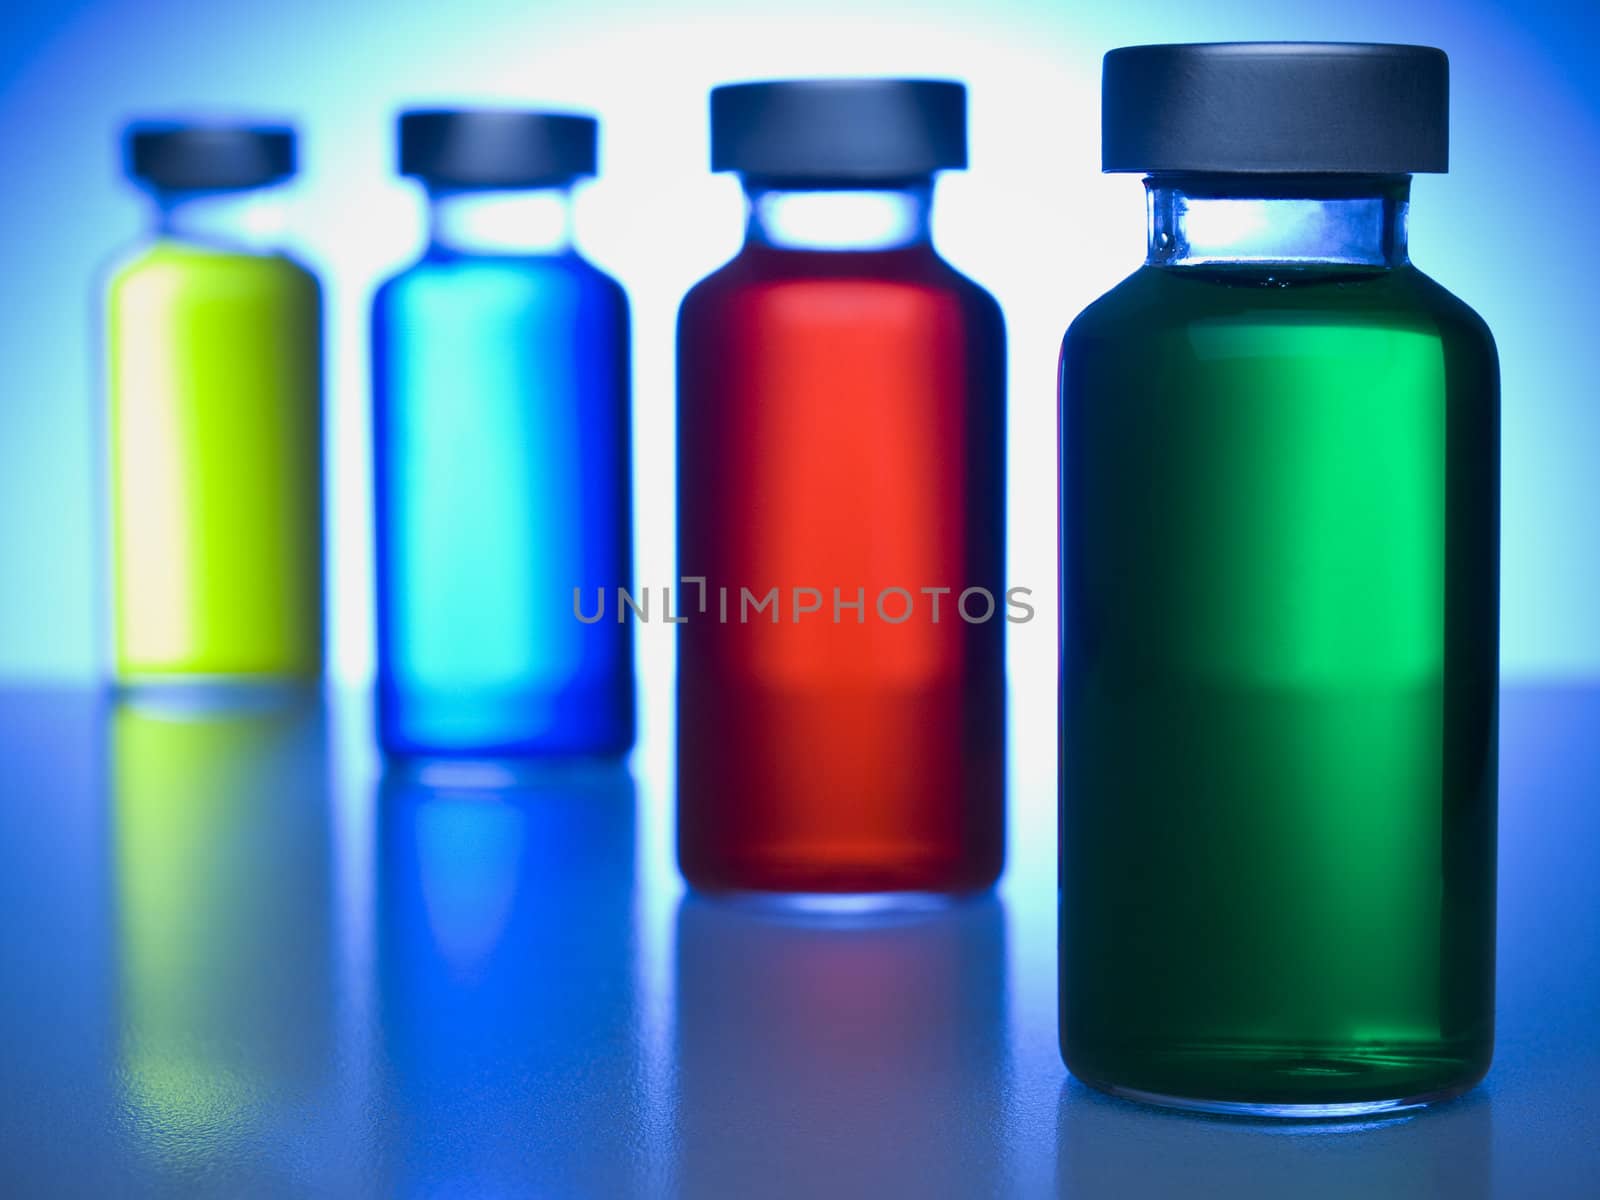 A row of vials filled with colored liquids. Focus on the green one.